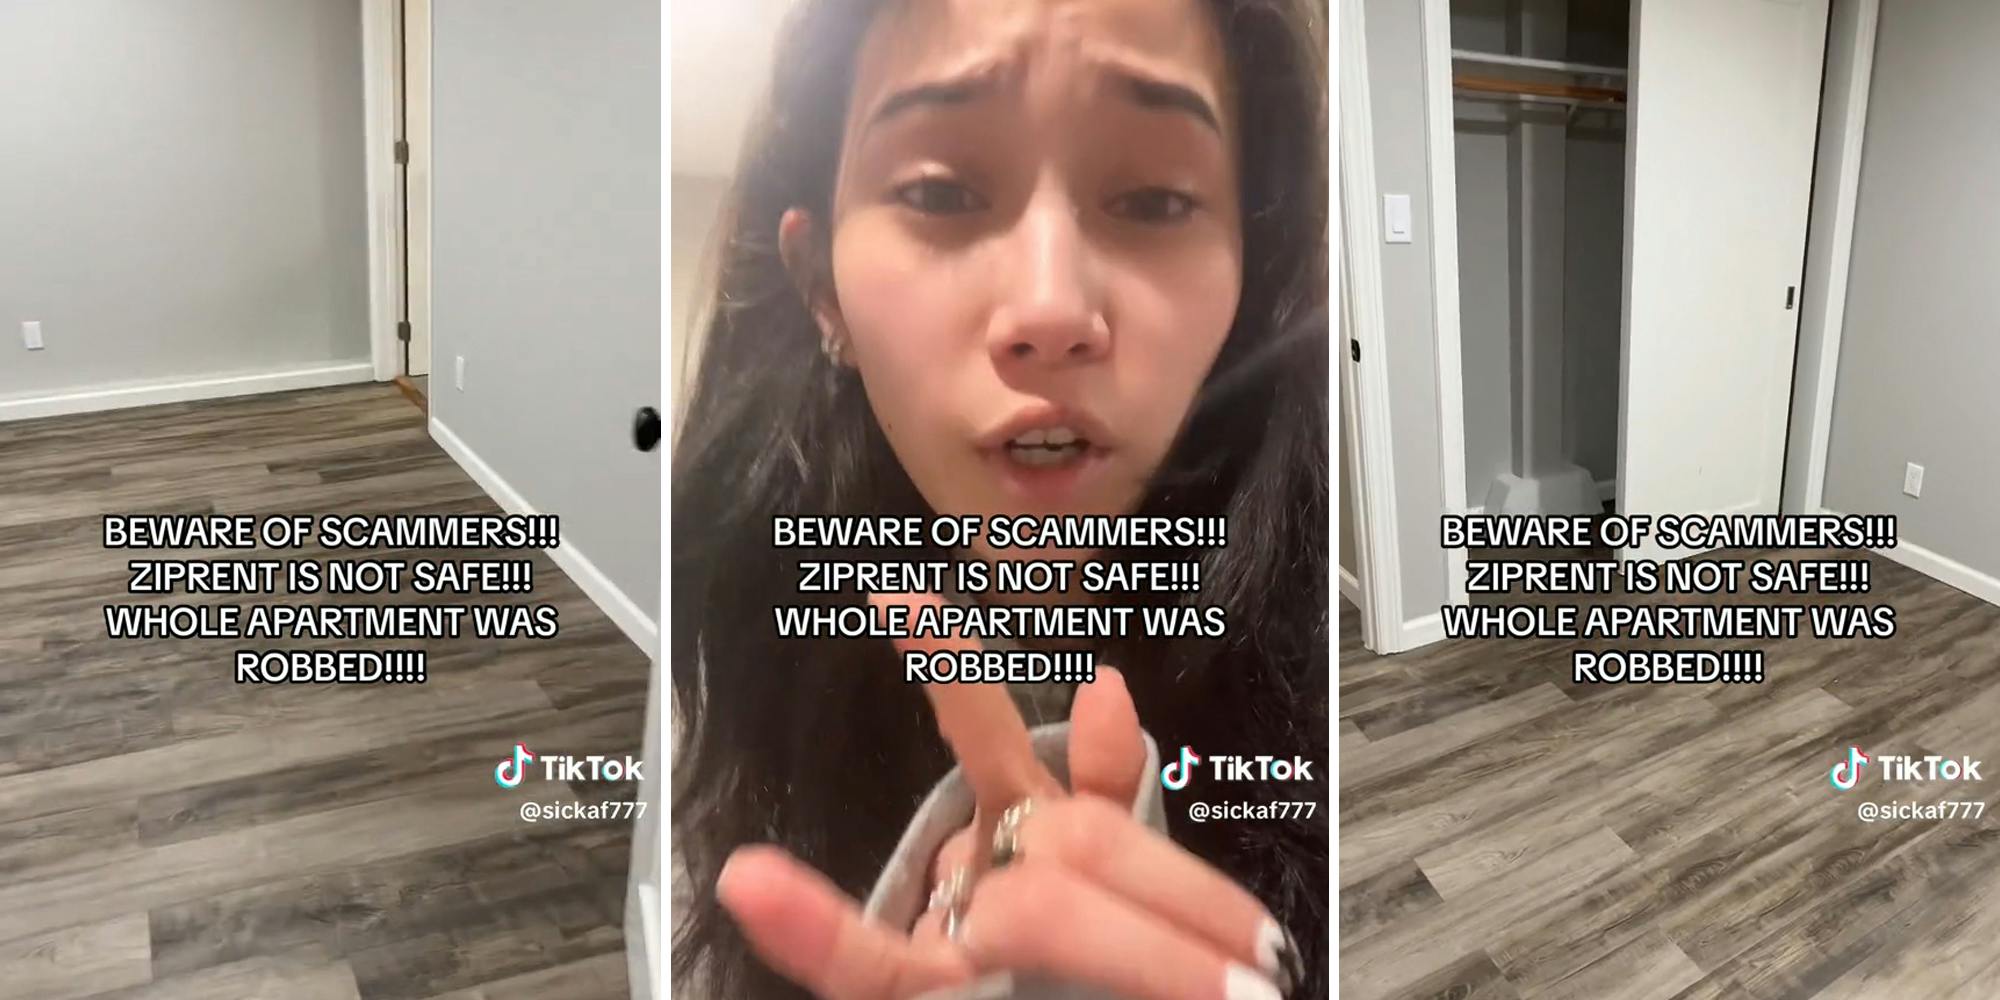 young woman in empty apartment with caption "BEWARE OF SCAMMERS!!! ZIPRENT IS NOT SAFE!!! WHOLE APARTMENT WAS ROBBED!!!!"